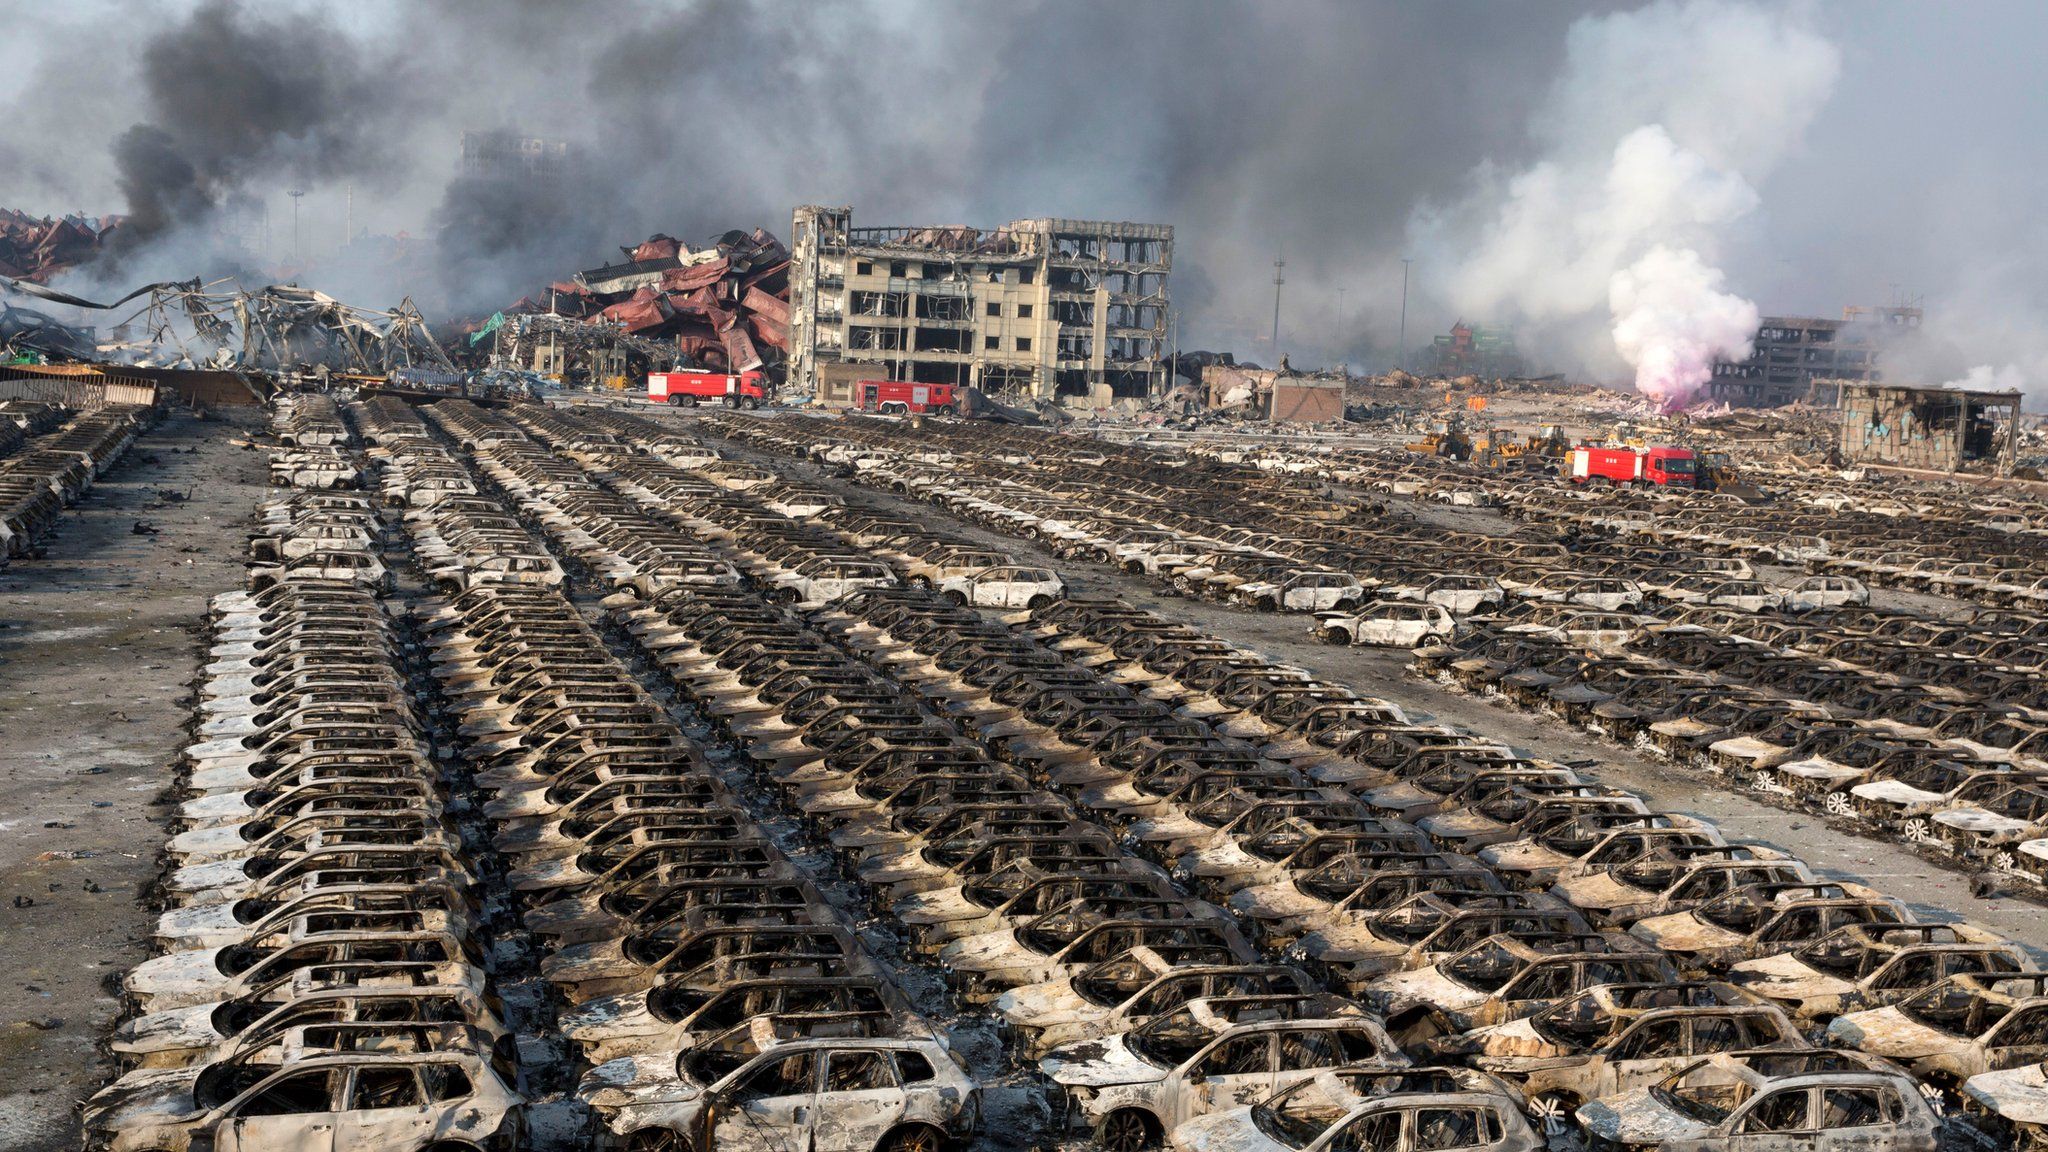 Smoke billows from the site of the Tianjin explosion, behind a parking lot filled with burnt out cars